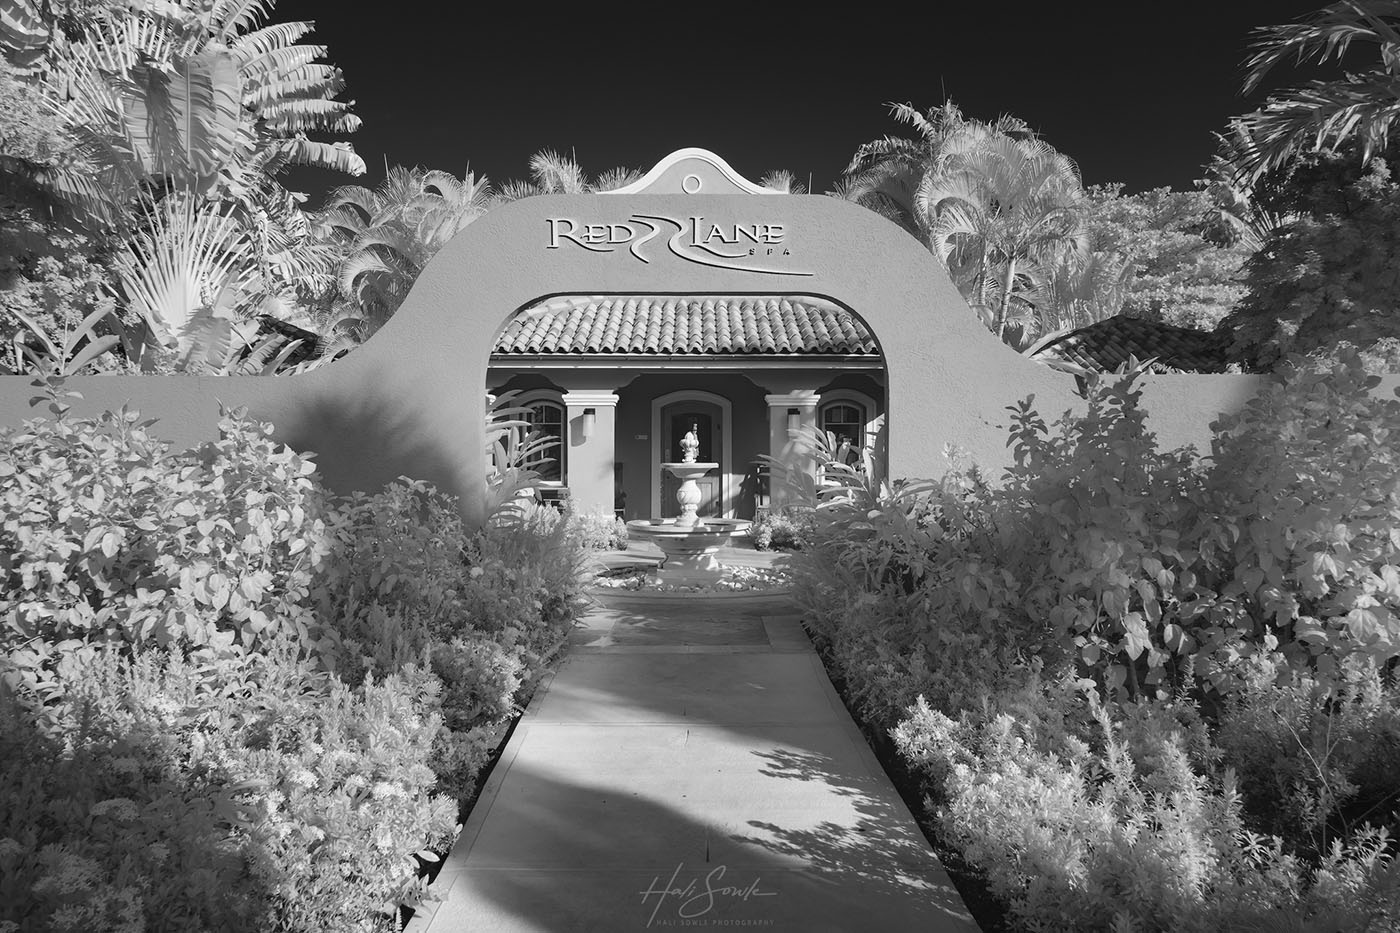 2019_09_Sandals-SouthCoast-10941-Edit1000.jpg - The entrance to the spa.  This area has developed so beautifully in the years we have been visiting the resort, it is so lush and beautiful.